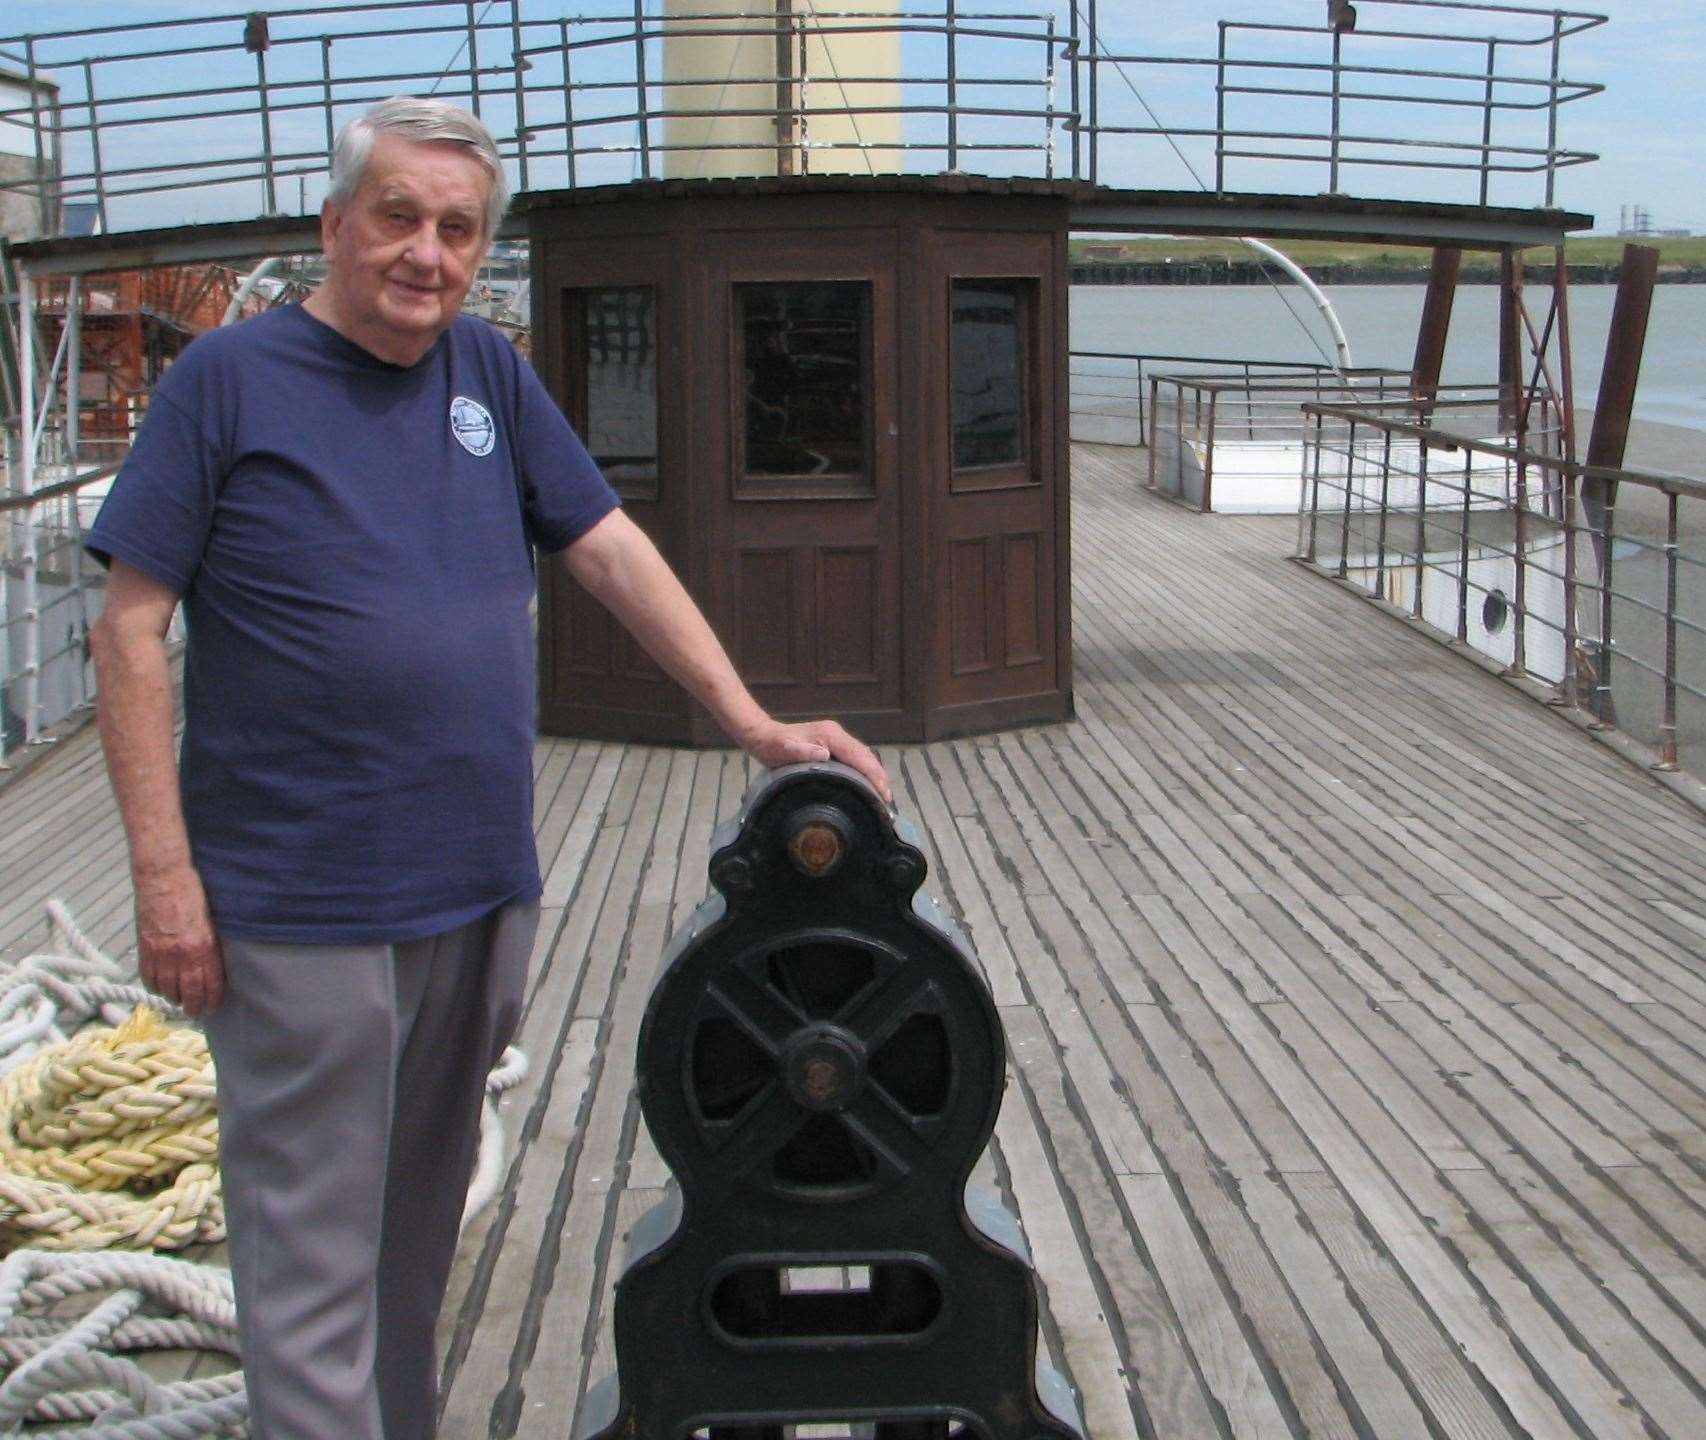 Brian Goodhew, aboard the Medway Queen, where he spent 66 years working